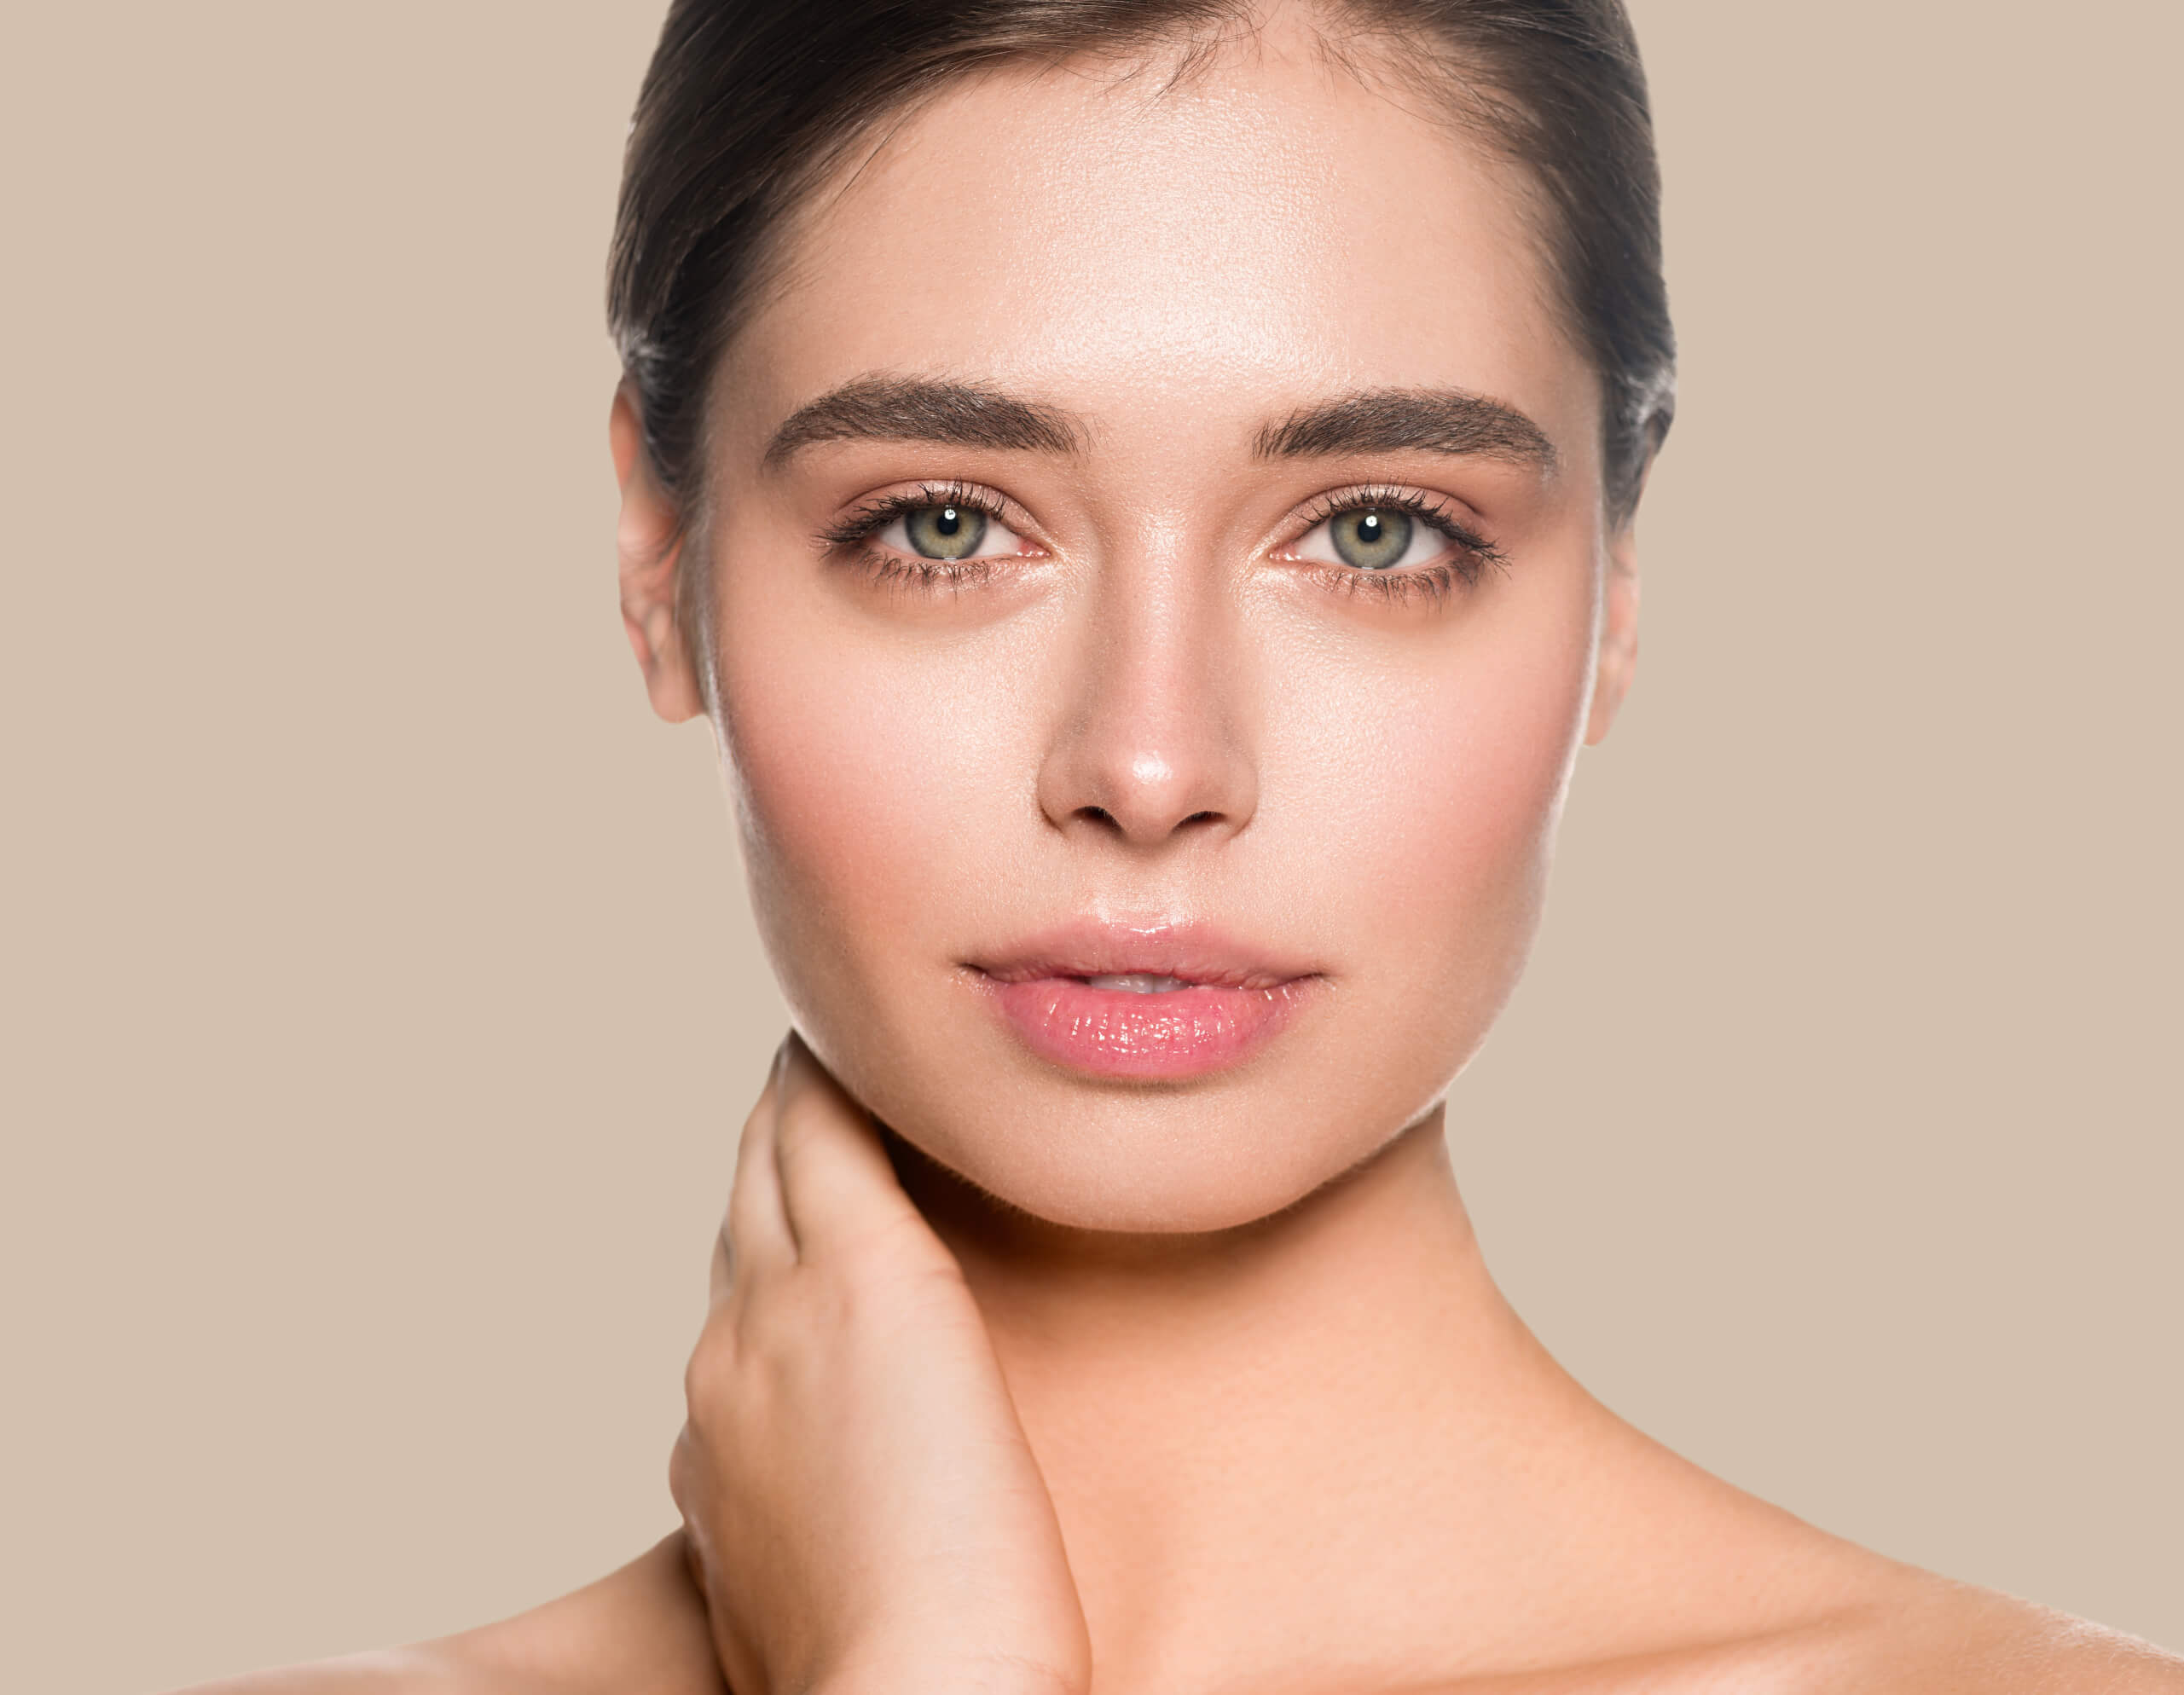 Cosmelan® Peels - Are they worth it? image